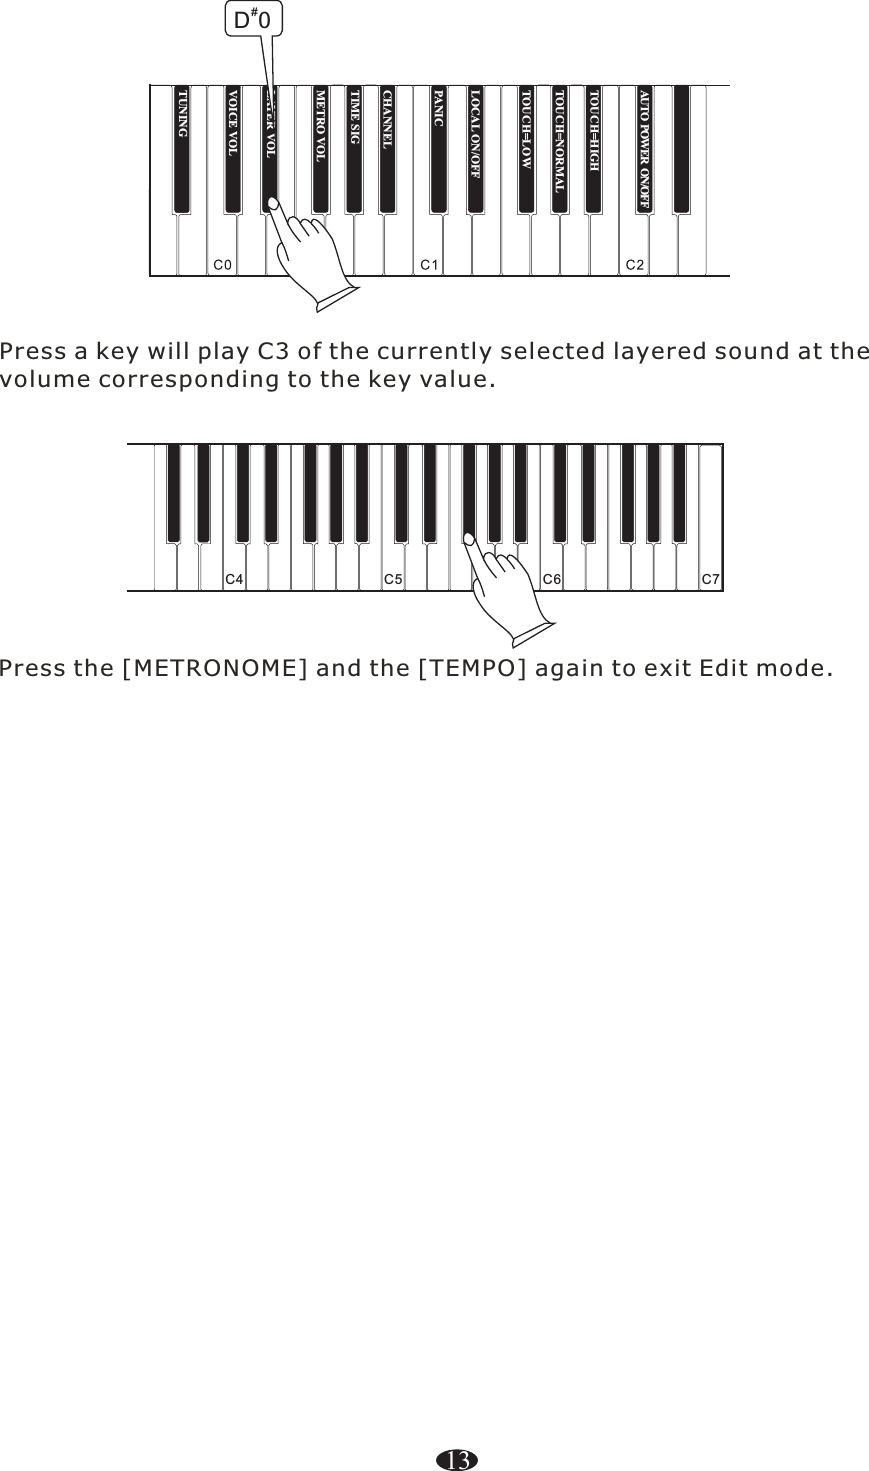 C4 C5 C6 C7       Press the [METRONOME] and the [TEMPO] again to exit Edit mode.13Press a key will play C3 of the currently selected layered sound at the volume corresponding to the key value.TUNINGTOUCH=HIGHTOUCH=NORMALTOUCH=LOWLOCAL ON/OFFPANICCHANNELTIME SIGMETRO VOLLAYER VOLVOICE VOL#D0AUTO POWER ON/OFF